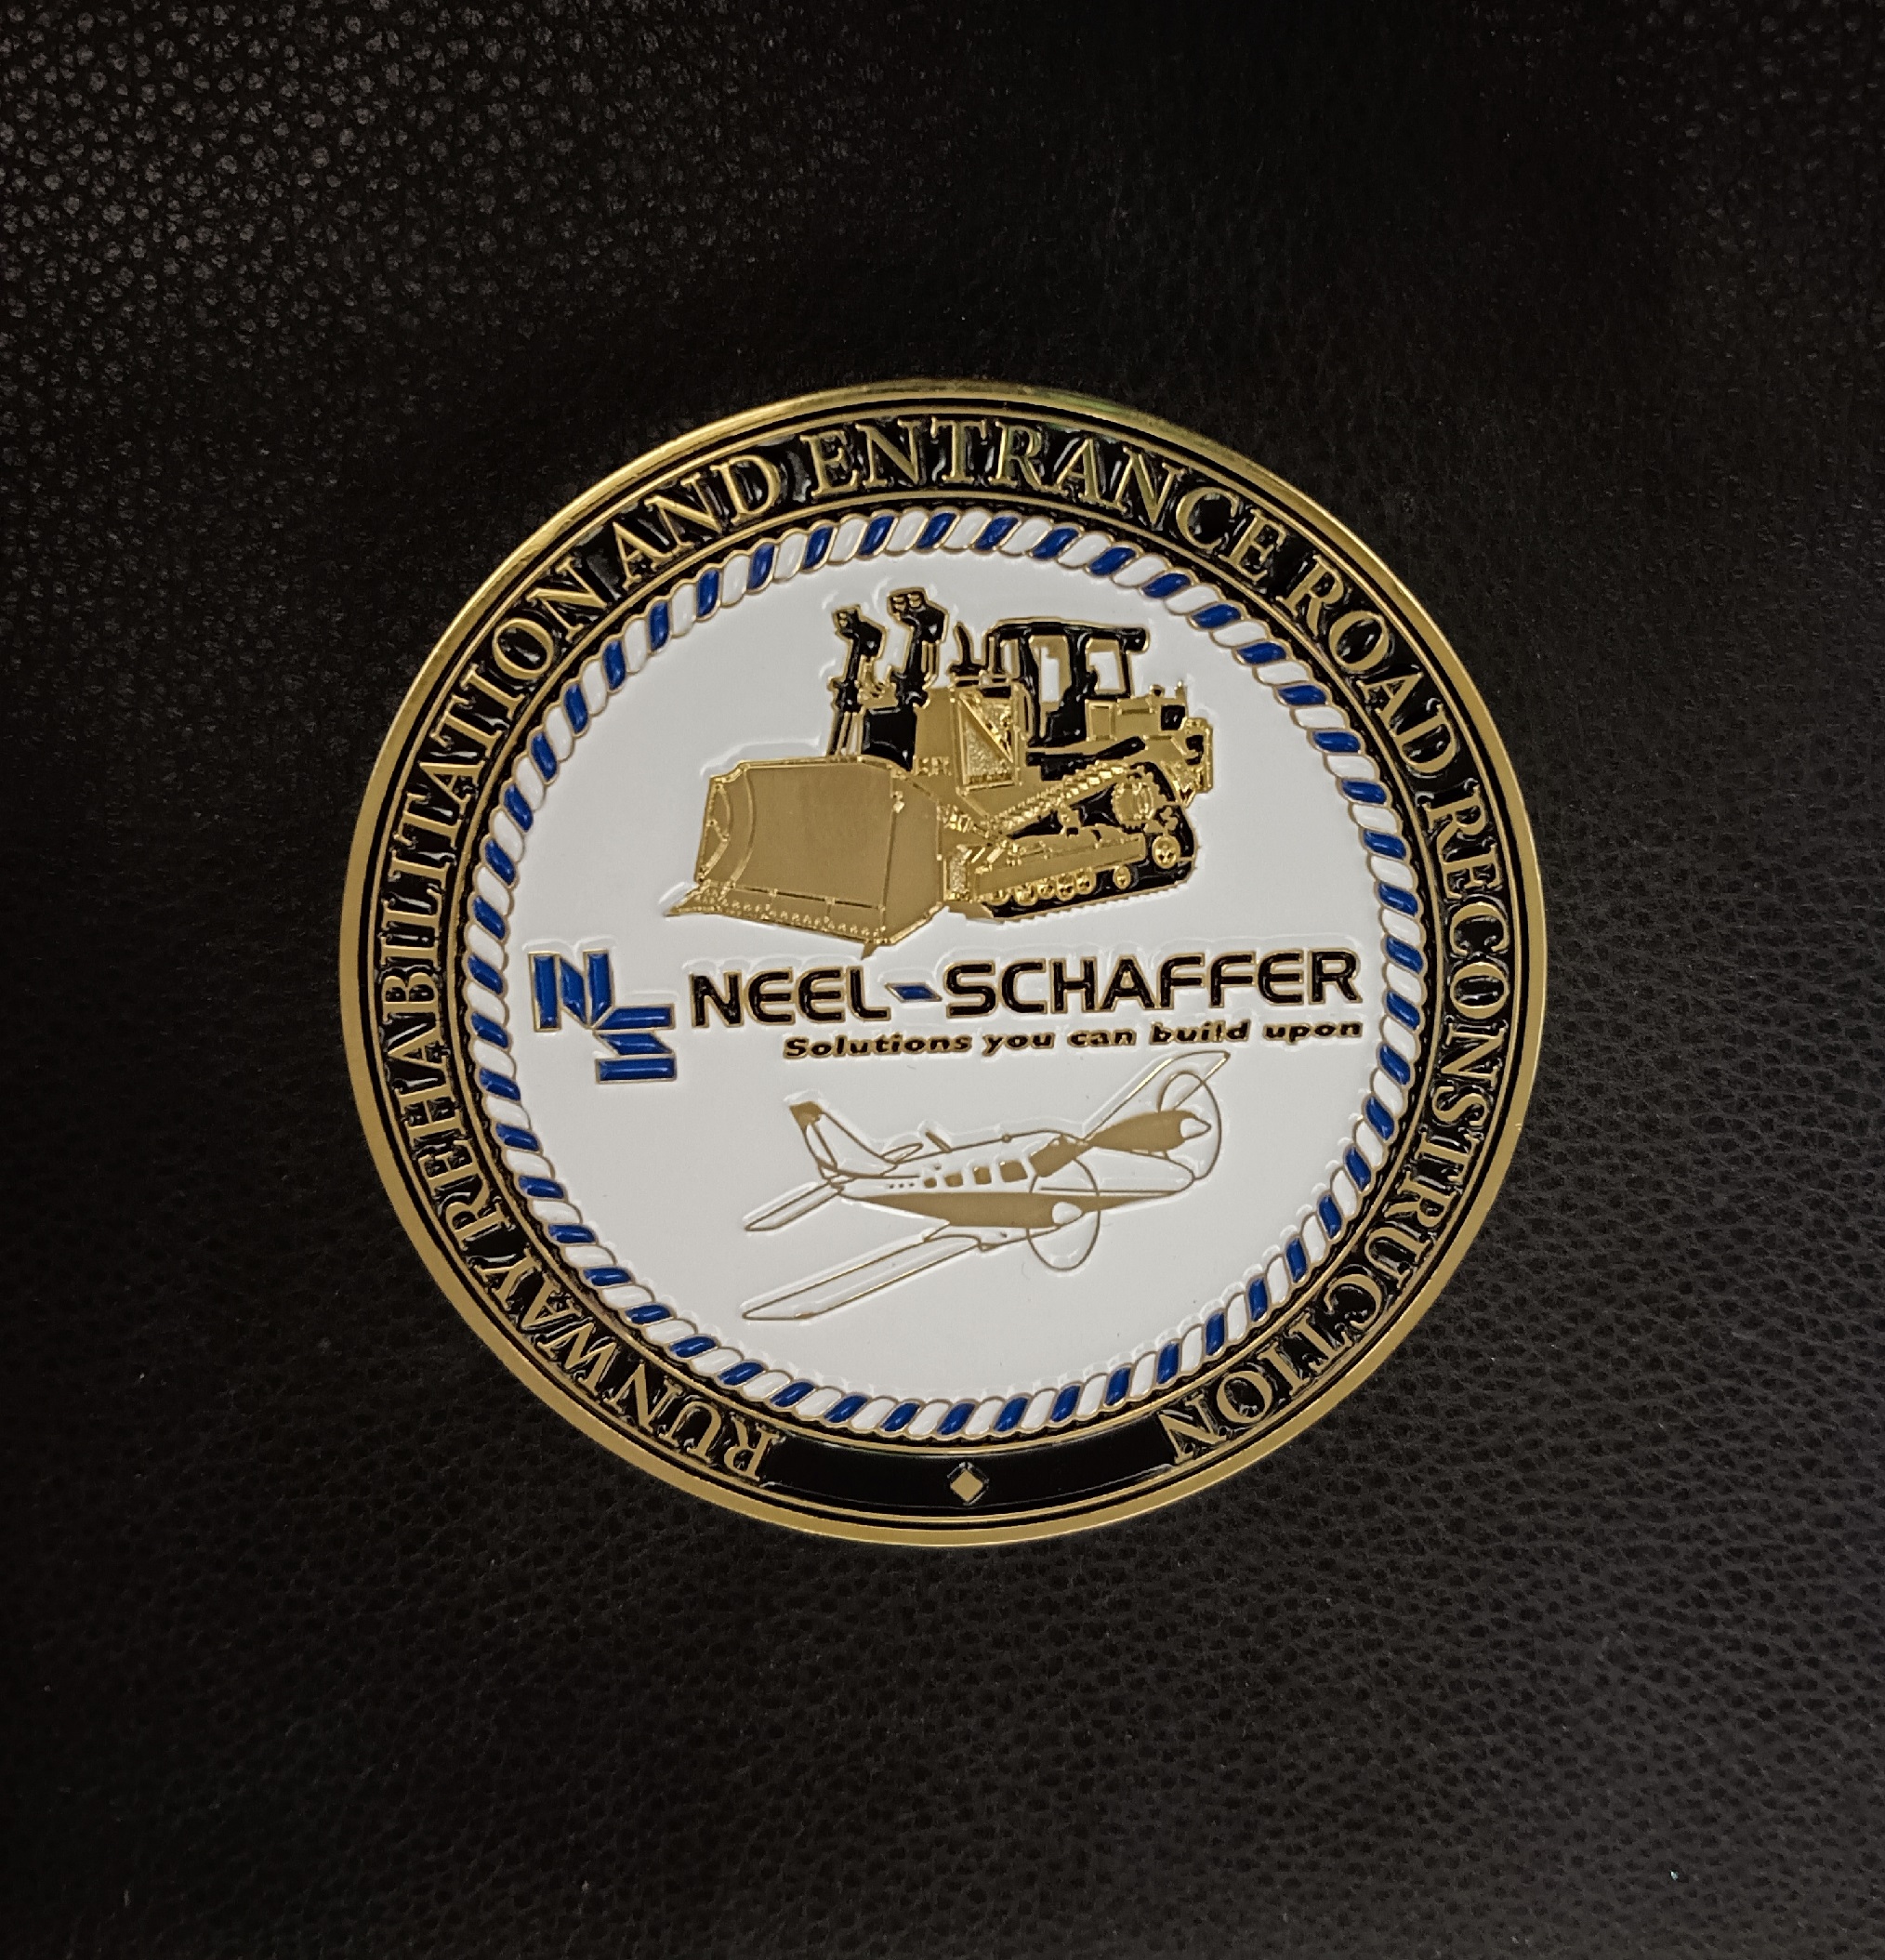 Construction Company Challenge Coin 2